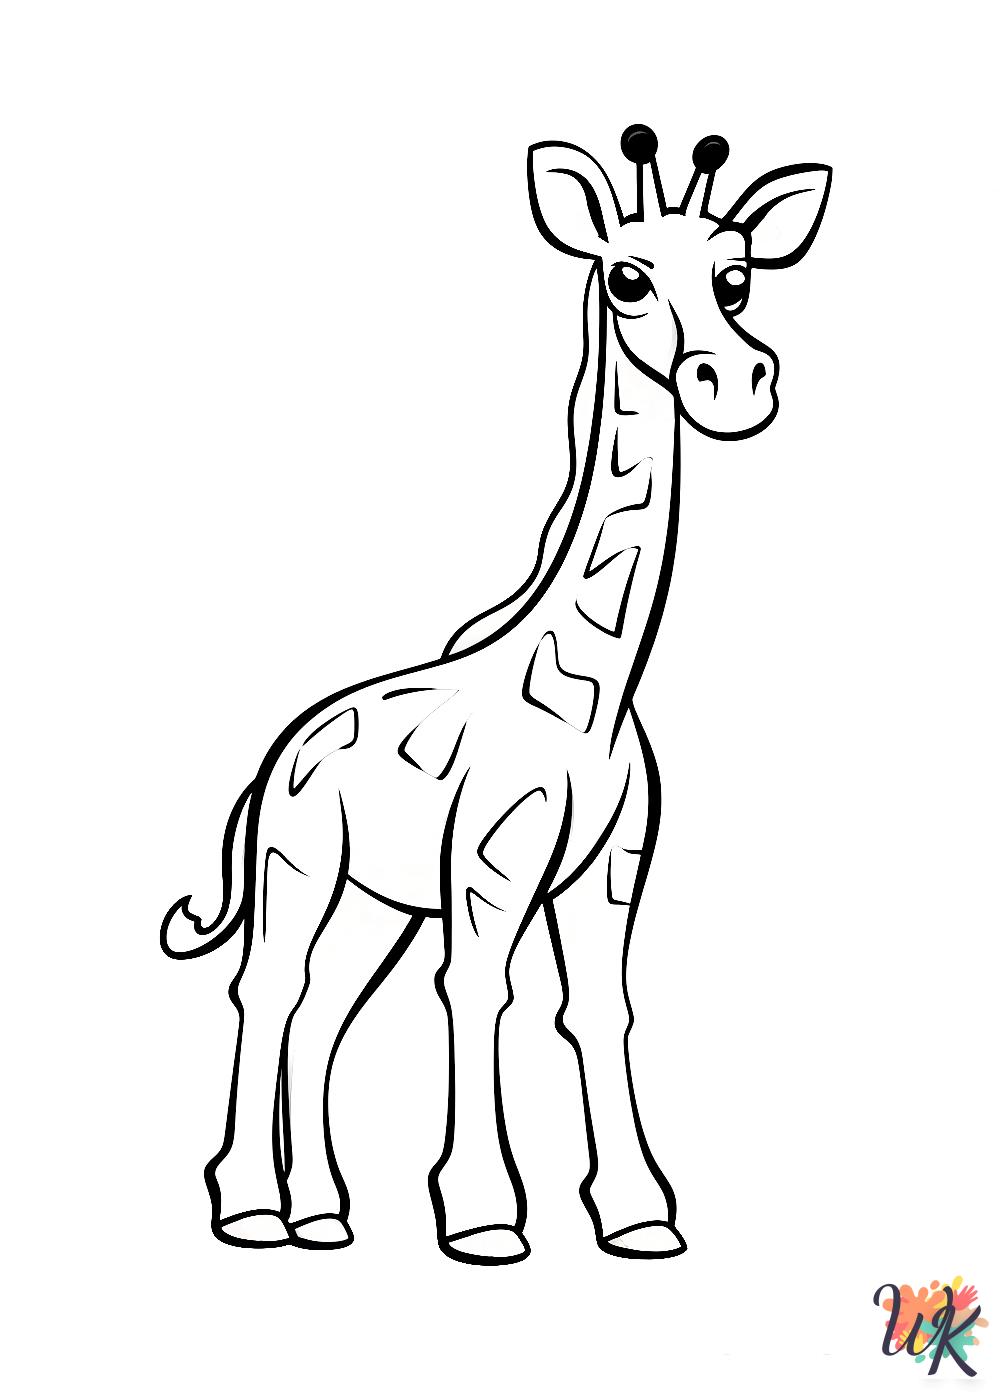 Giraffe coloring pages for adults